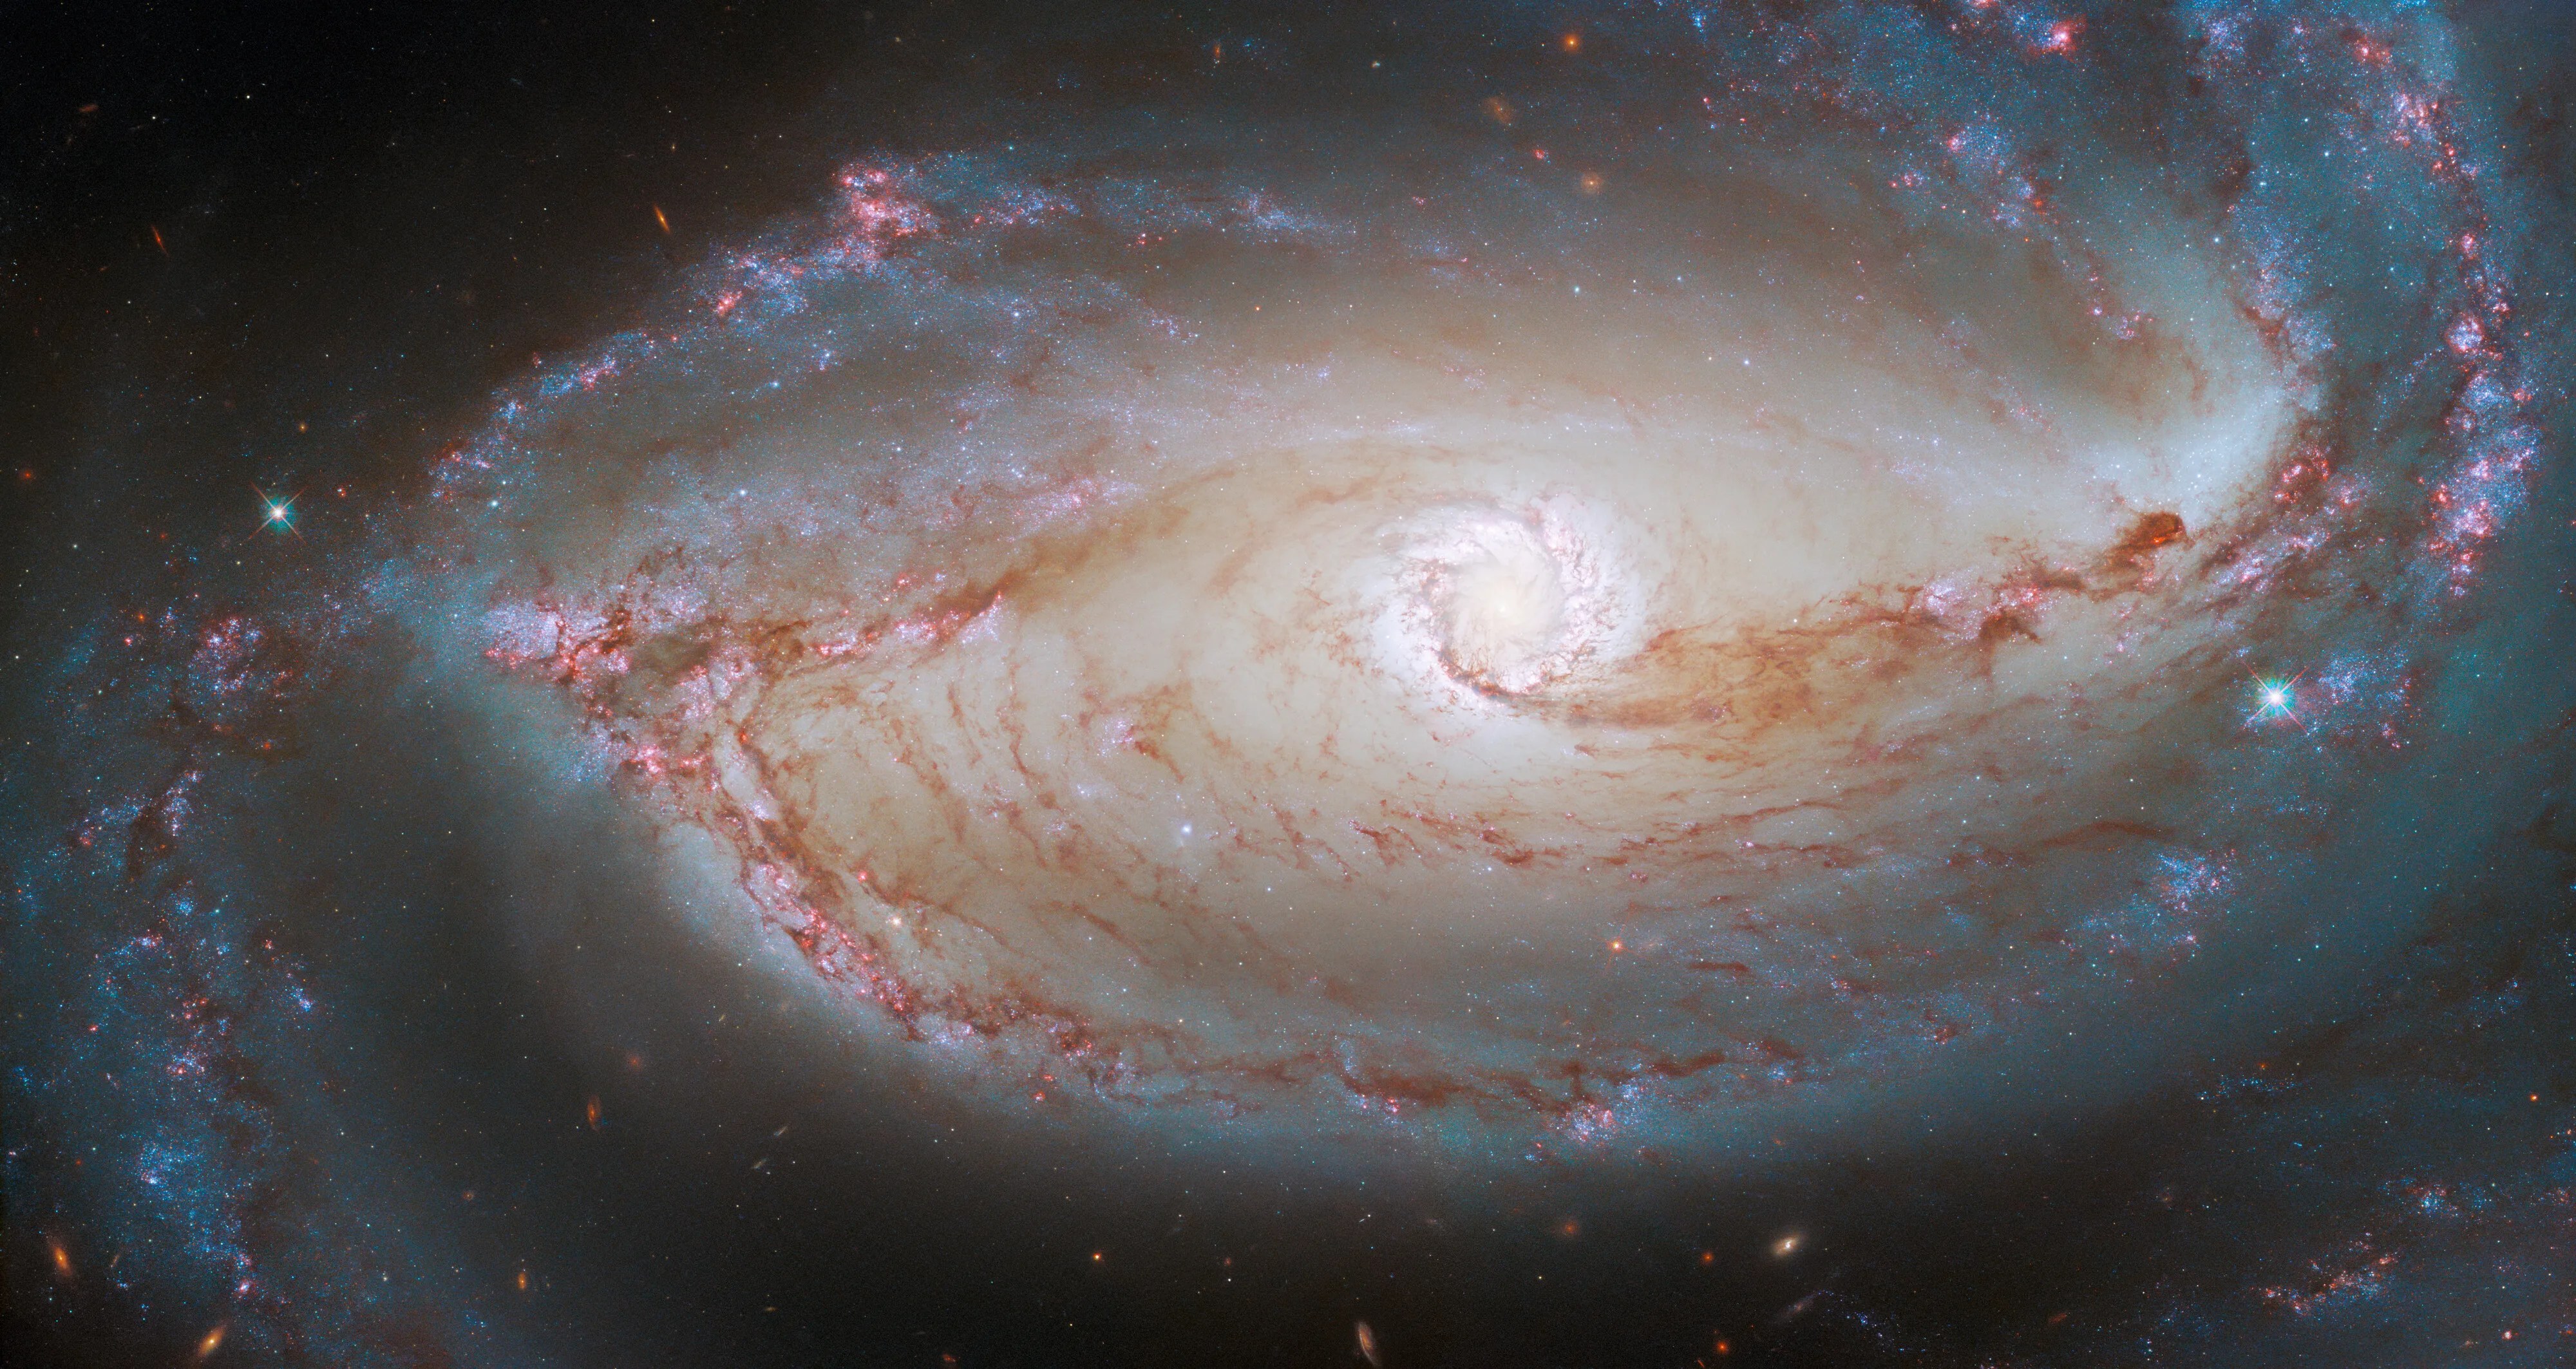 A large spiral galaxy fills the frame. reddish star-forming regions dot the tightly-wound  spiral arms